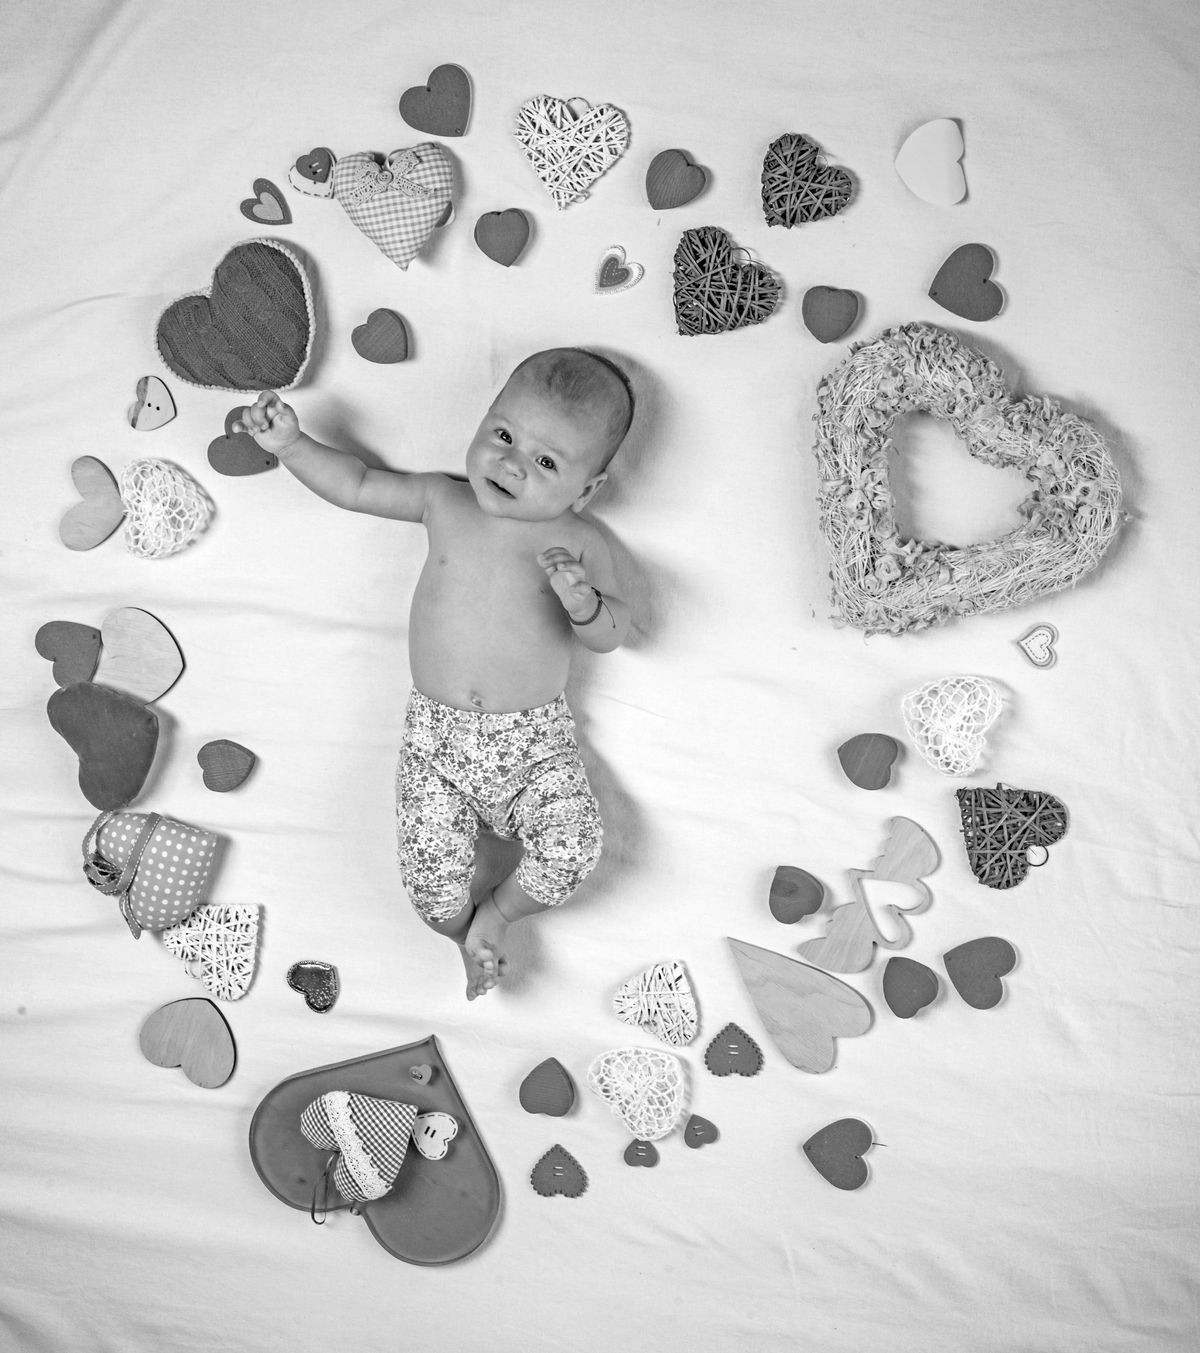 Pleasant timespending. Love. Portrait of happy little child. Sweet little baby. New life and birth. Family. Child care. Small girl among red hearts. Childhood happiness.Valentines day.